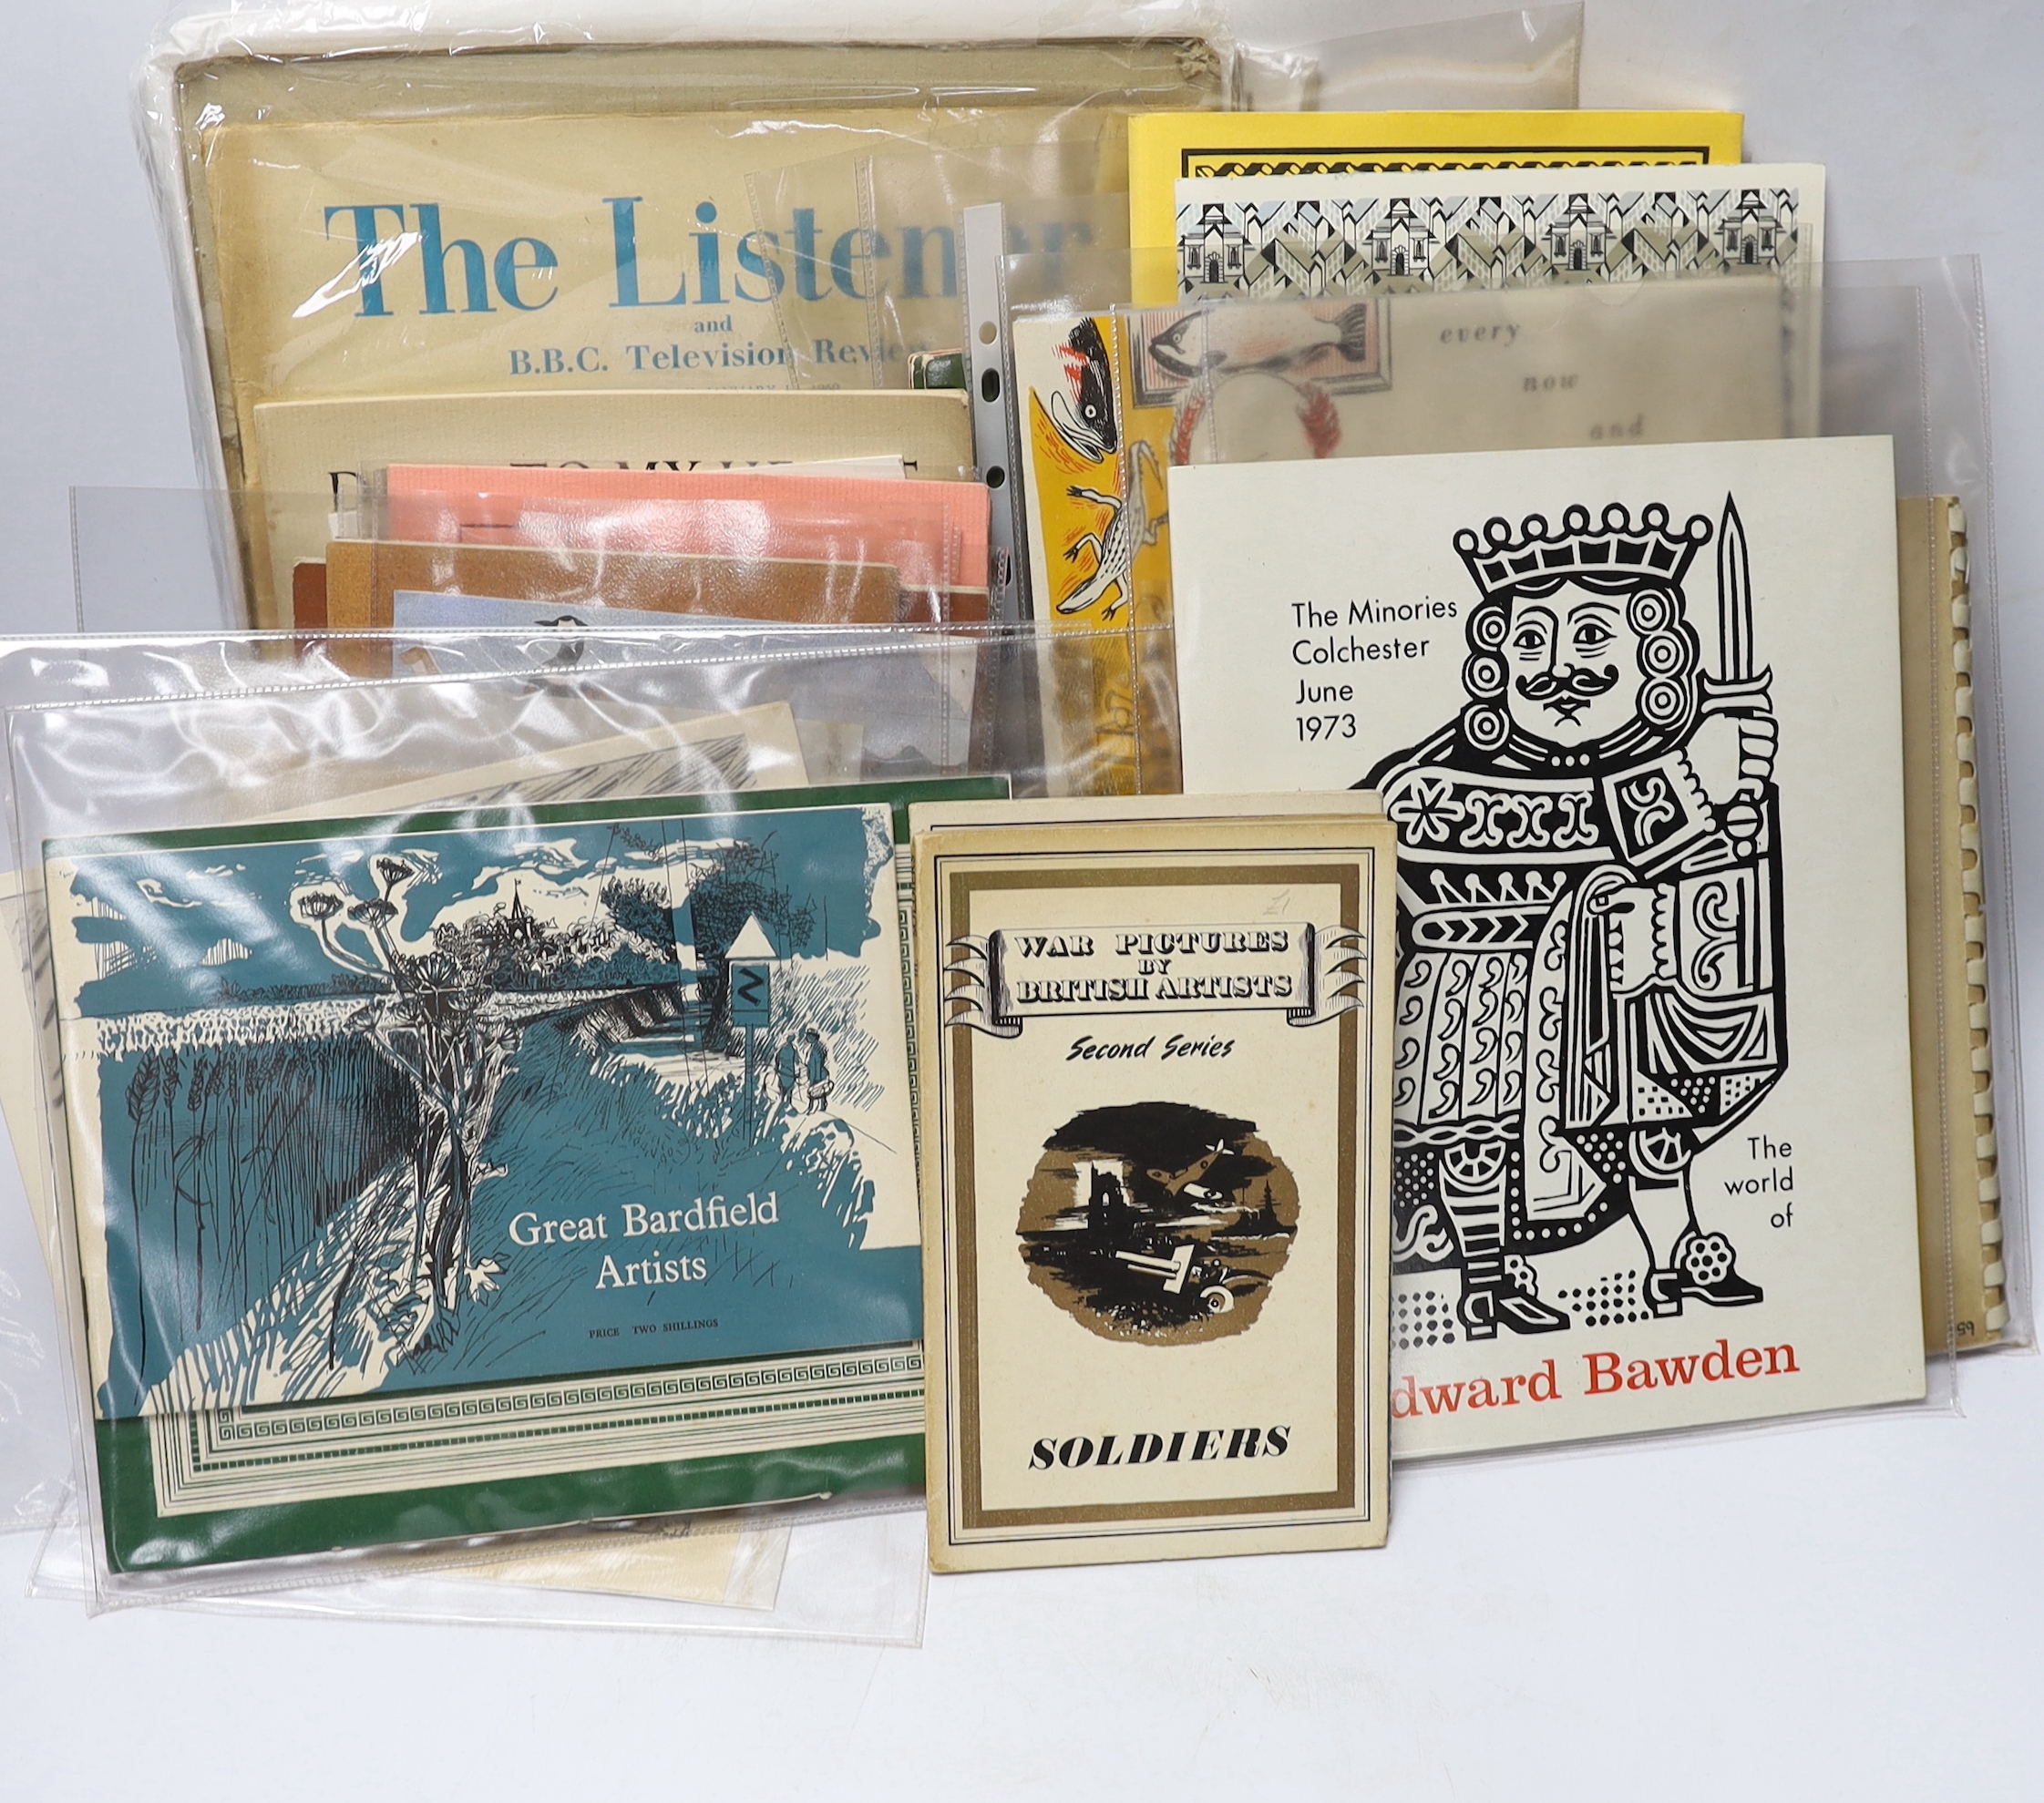 Bawden, Edward - A large collection of booklets, catalogues, periodicals etc., illustrated by, or including illustrations by, Edward Bawden, including:- Serjeant, R.B. - The Arabs, 1947; The Listener and B.B.C. Televisio